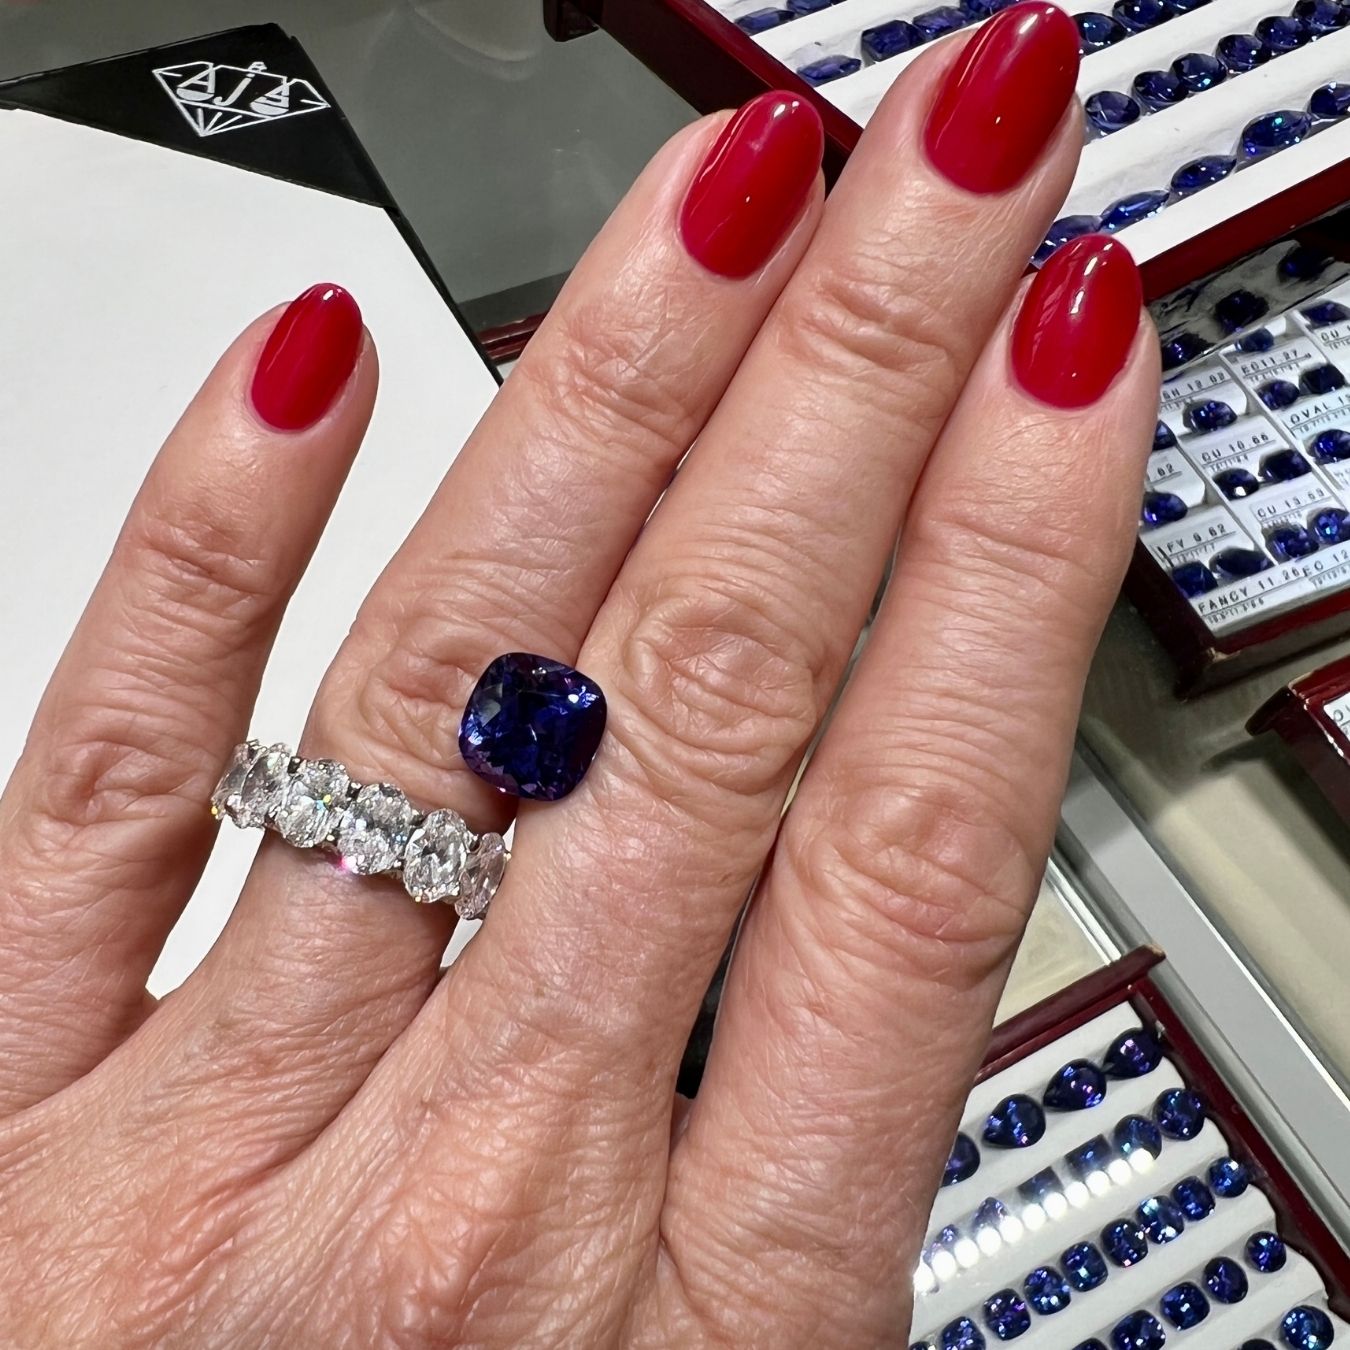 I am in love - with Tanzanite